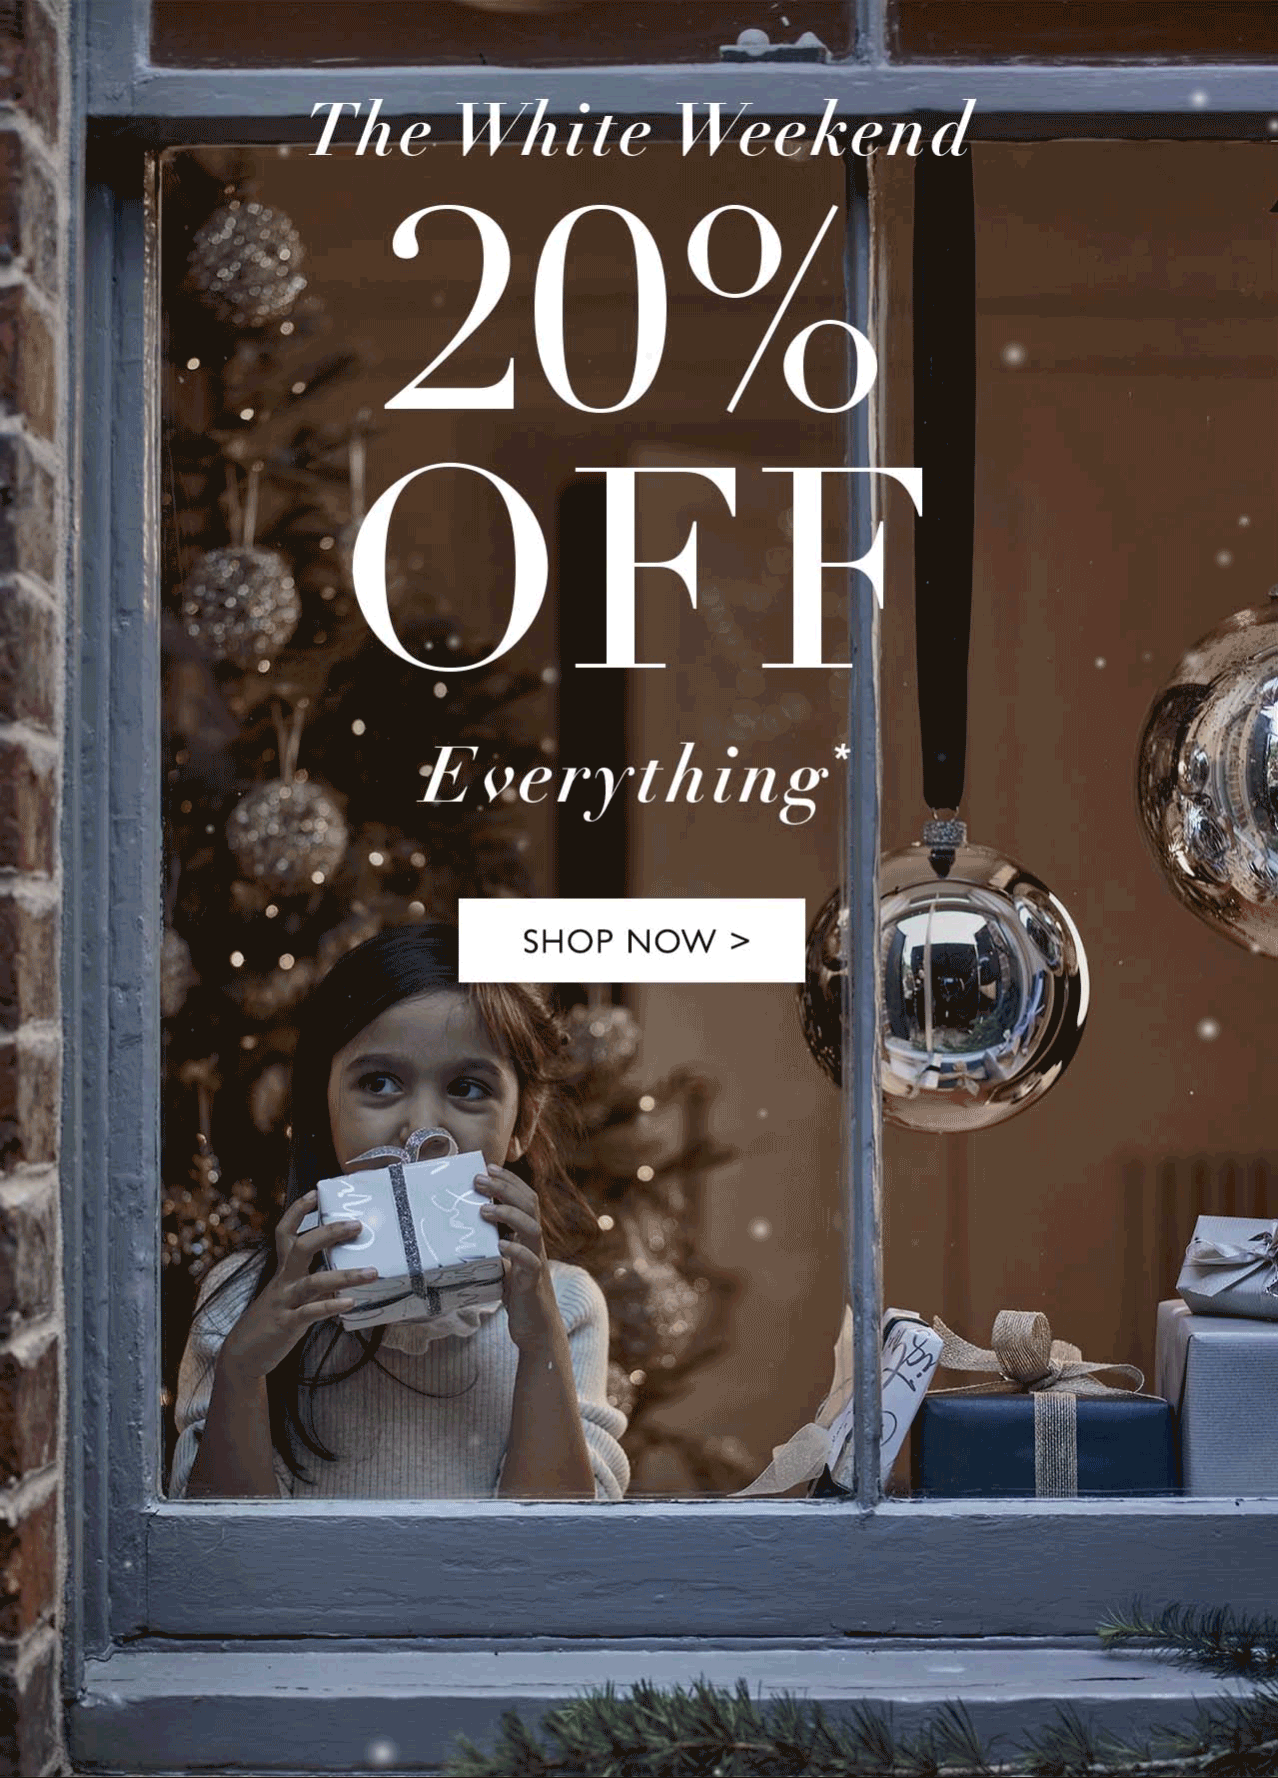 The White Weekend 20% off Everything* | SHOP NOW